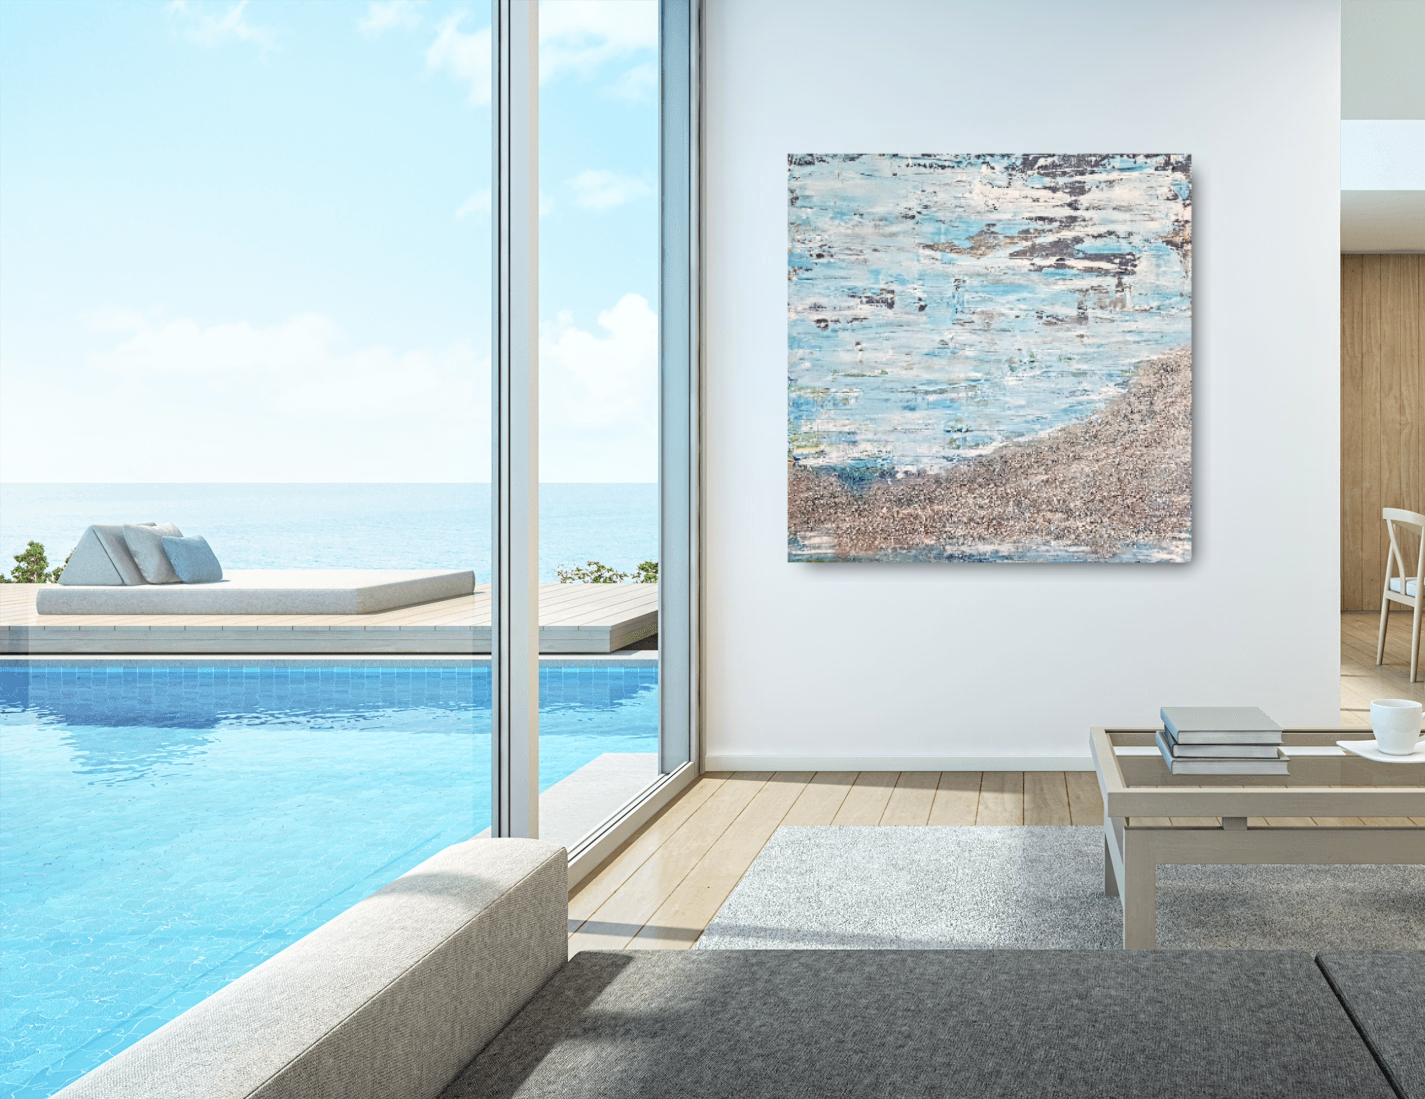 This is a calming painting enhancing the ocean featuring light blue colors and silver pebbles which add texture and depth to the painting